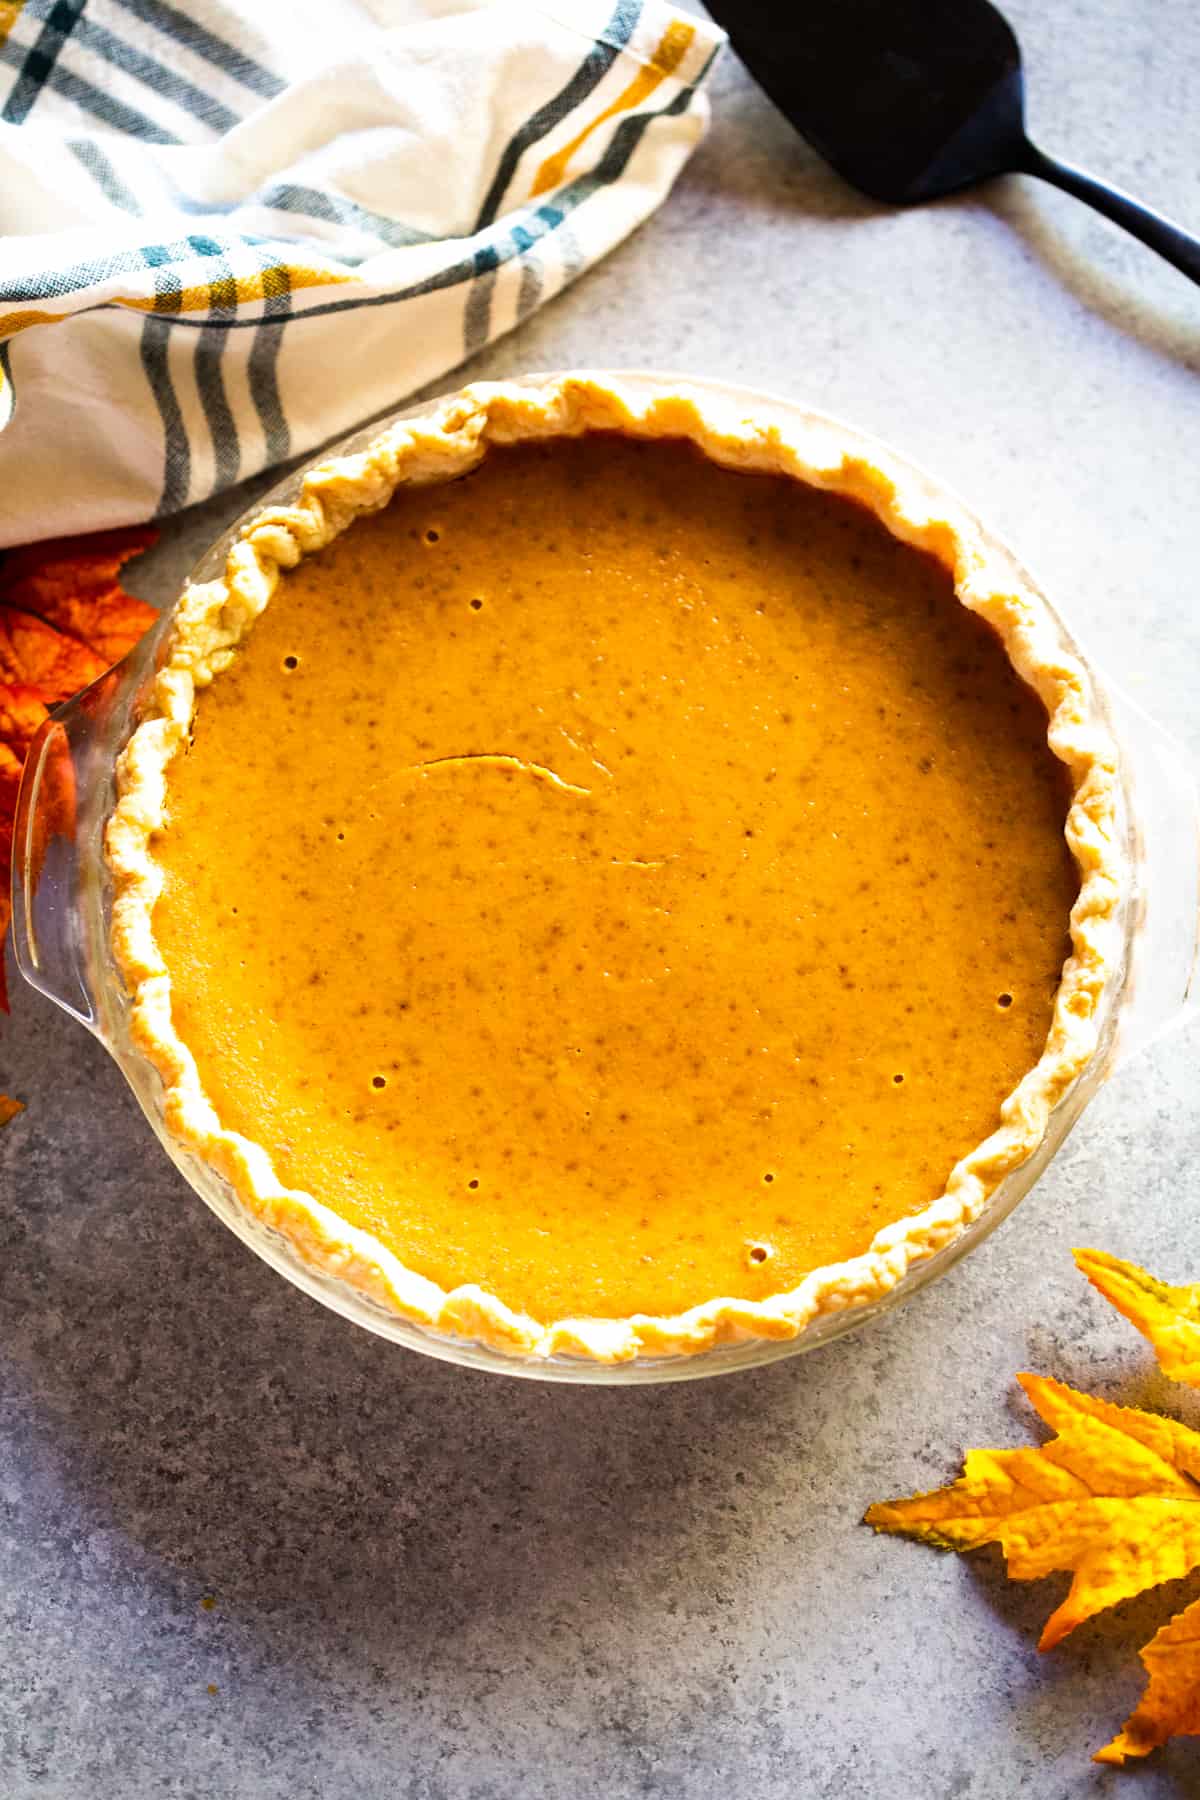 A homemade pumpkin pie in a pie pan, ready to slice and serve.